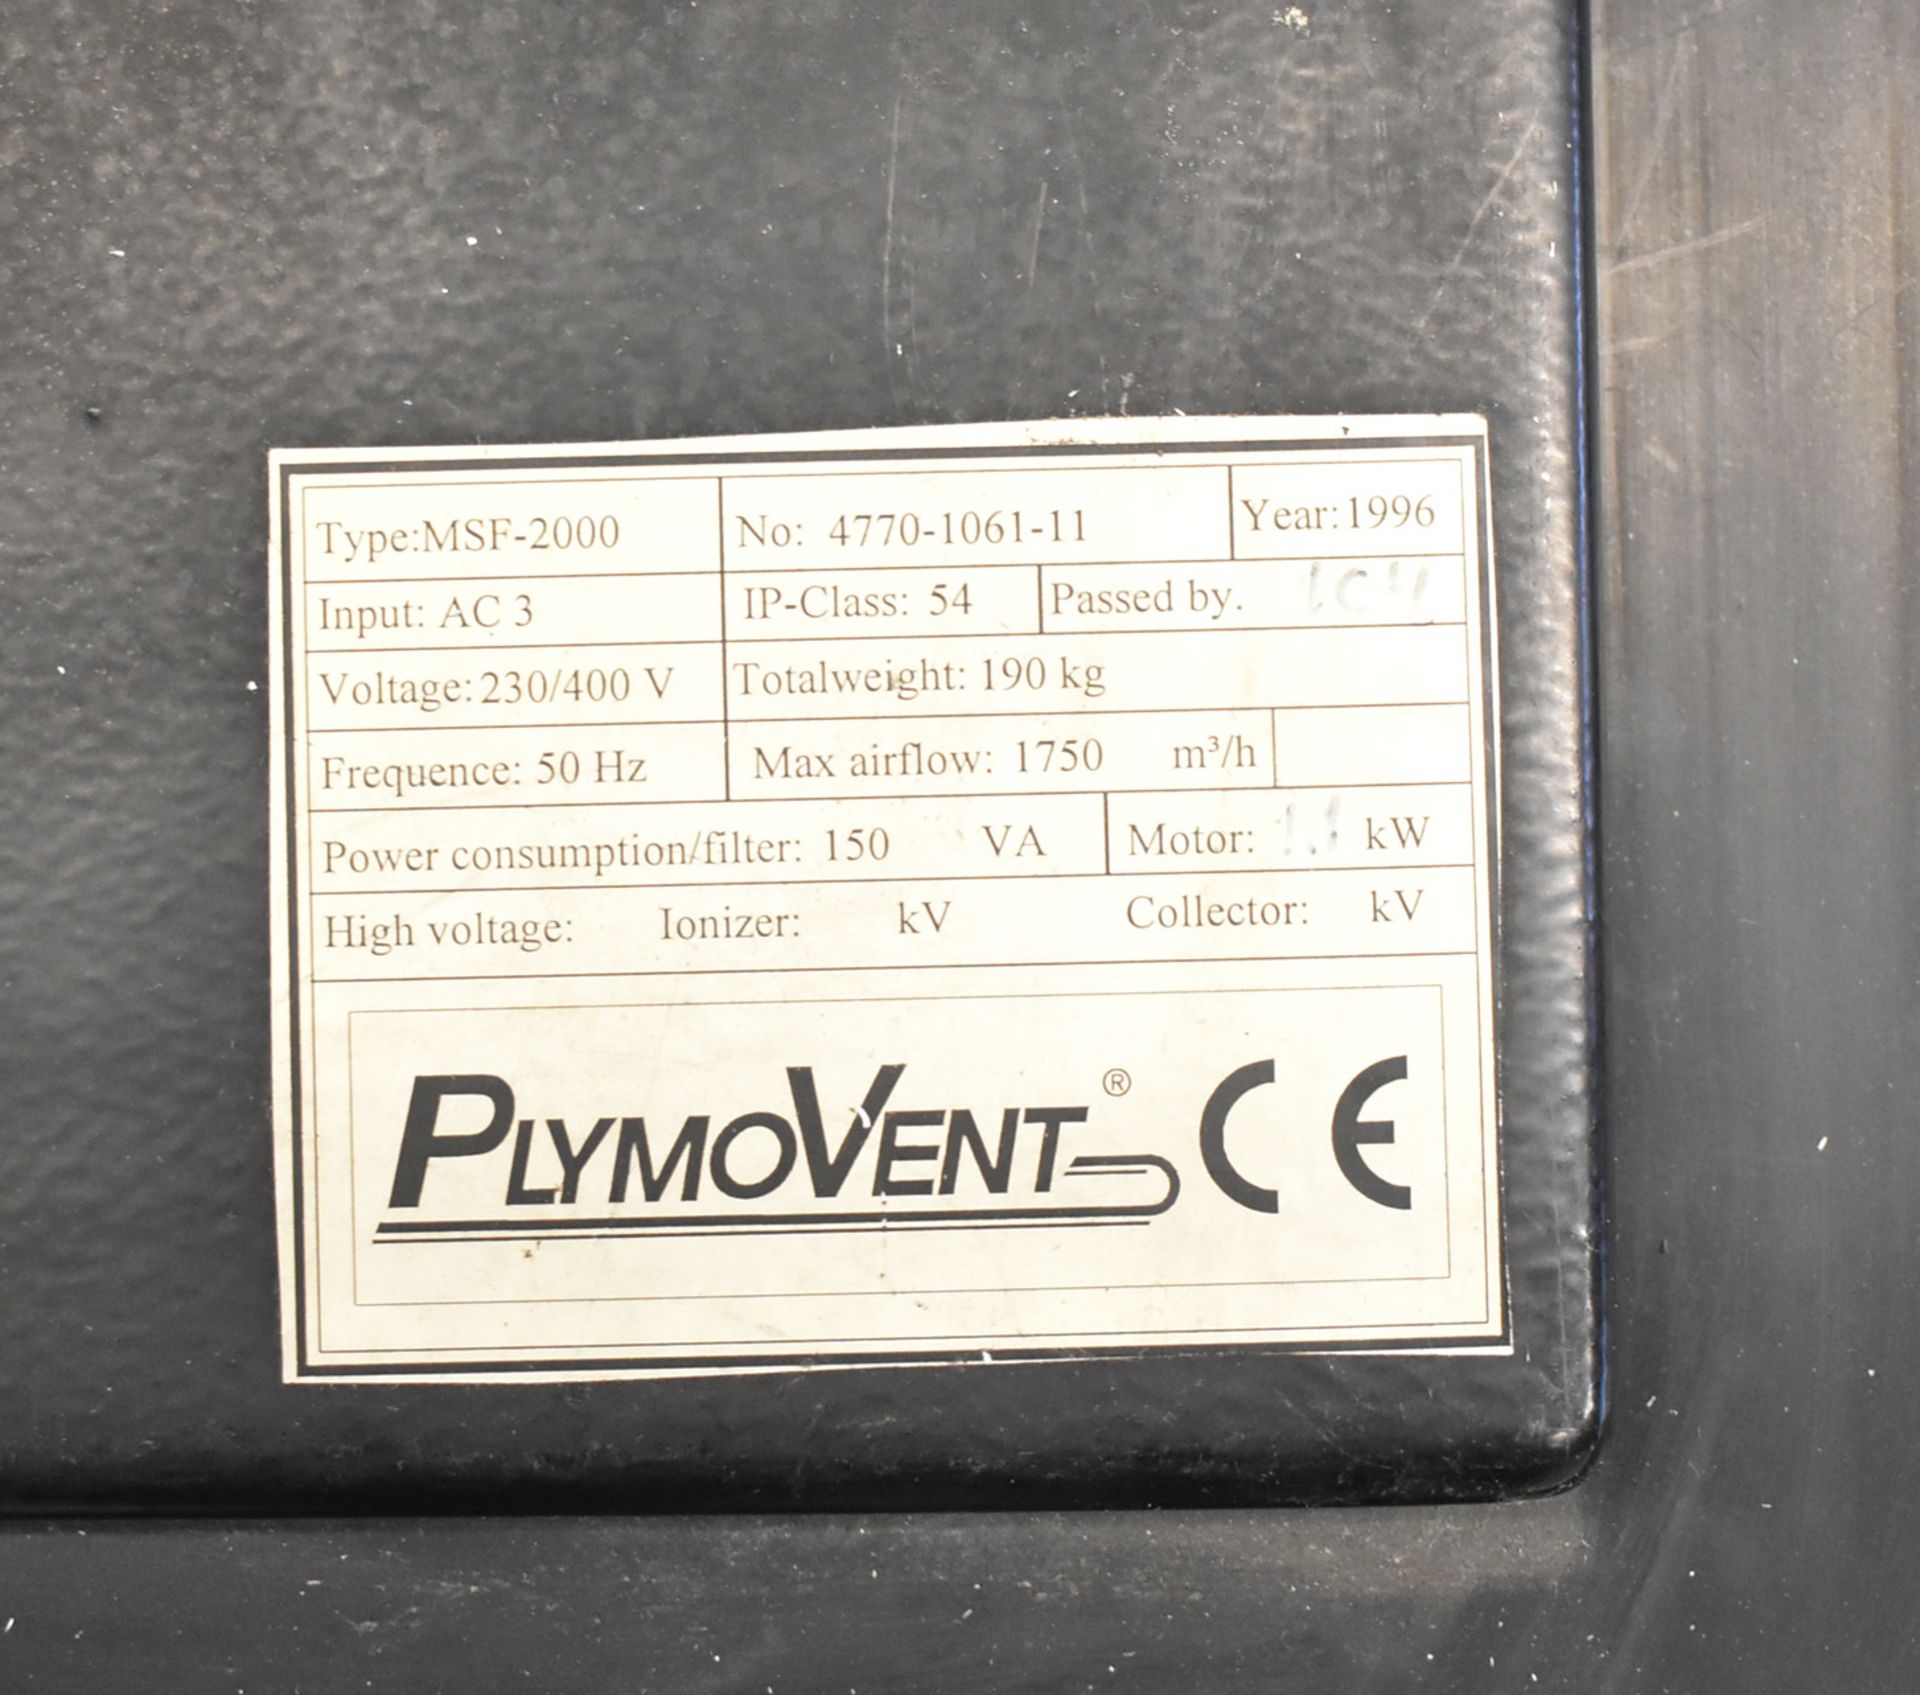 PLYMOVENT MSF-2000 1.5 KW DUST COLLECTOR WITH 1700 M3/HR CAP, S/N 4770-1061-11 (SEL) [Removal - Image 3 of 3